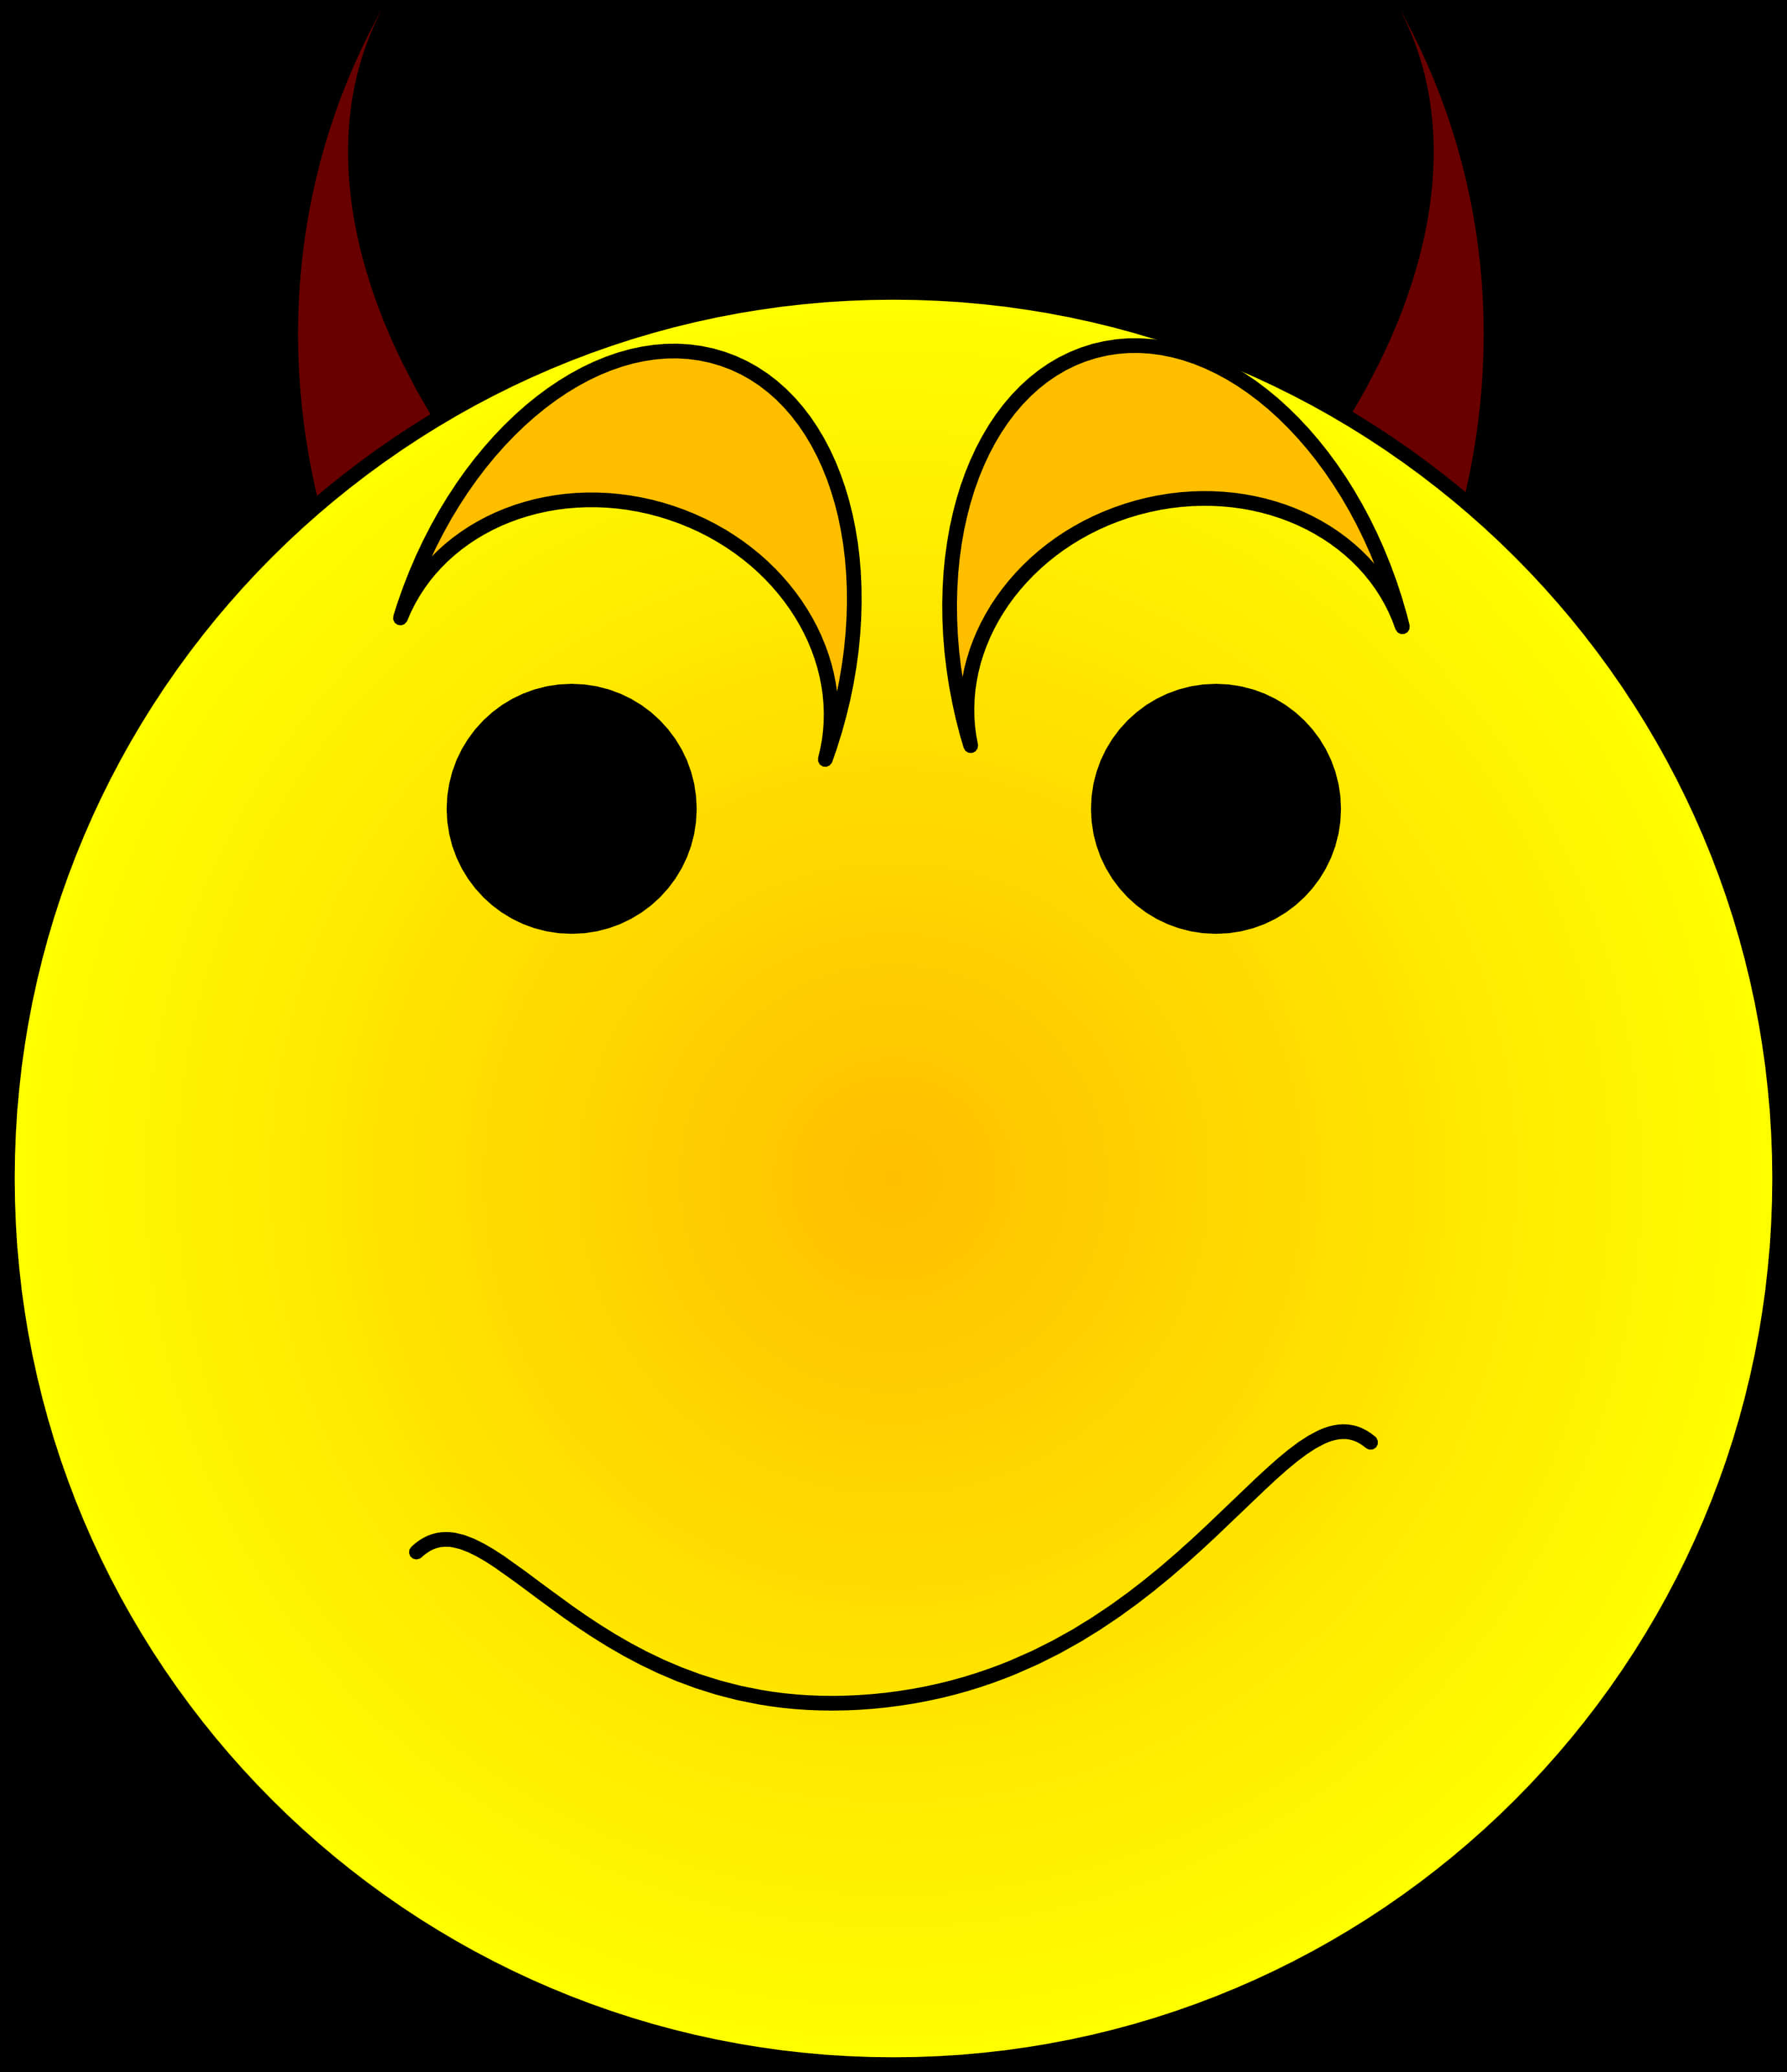 A Yellow Smiley Face With Horns